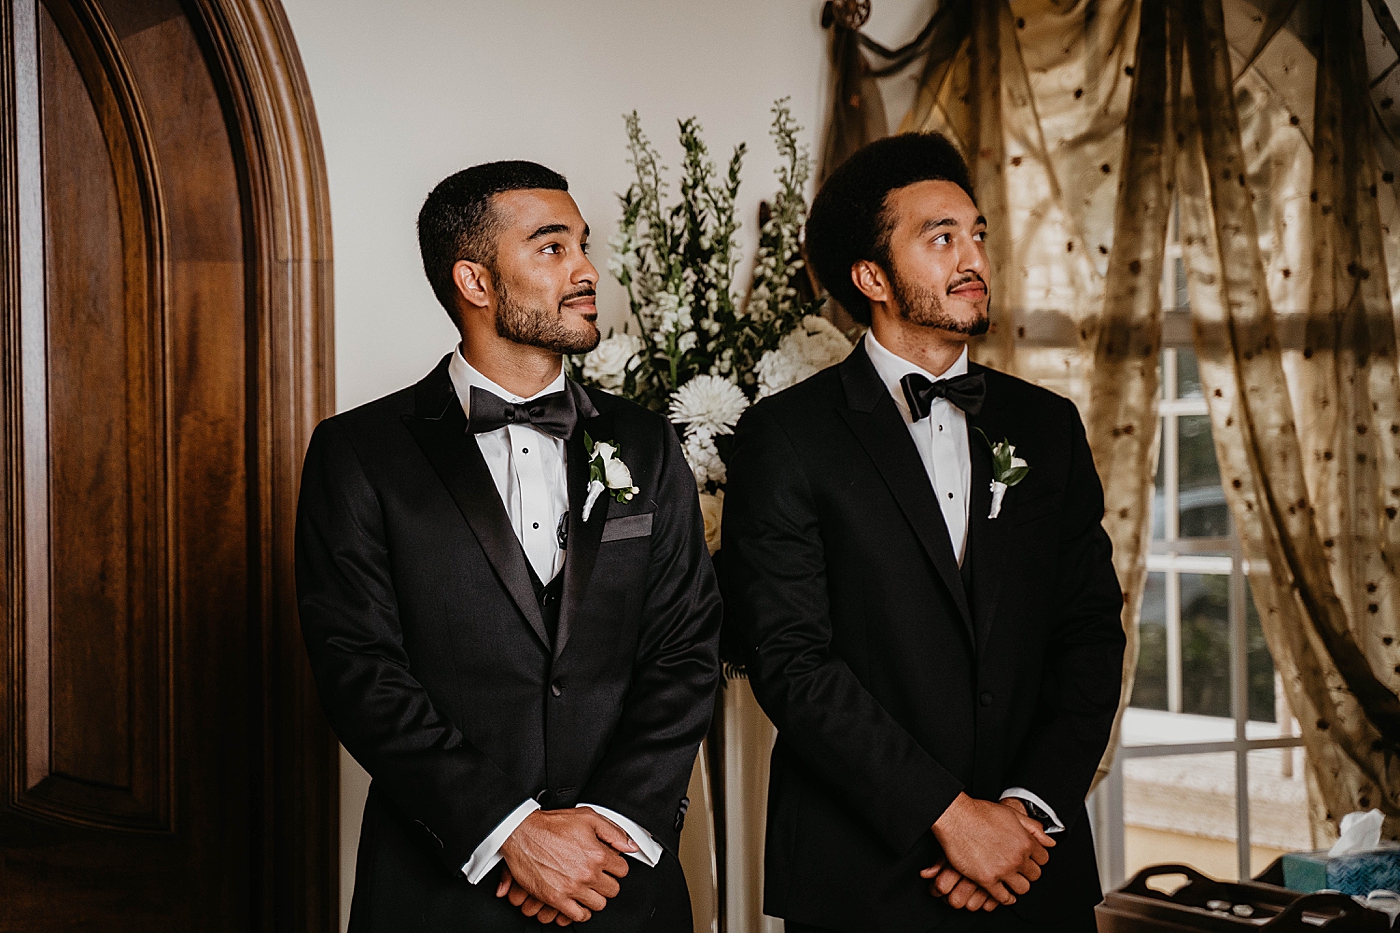 Groom with groomsman looking sharp Intimate Home Wedding captured by South Florida Wedding Photographer Krystal Capone Photography